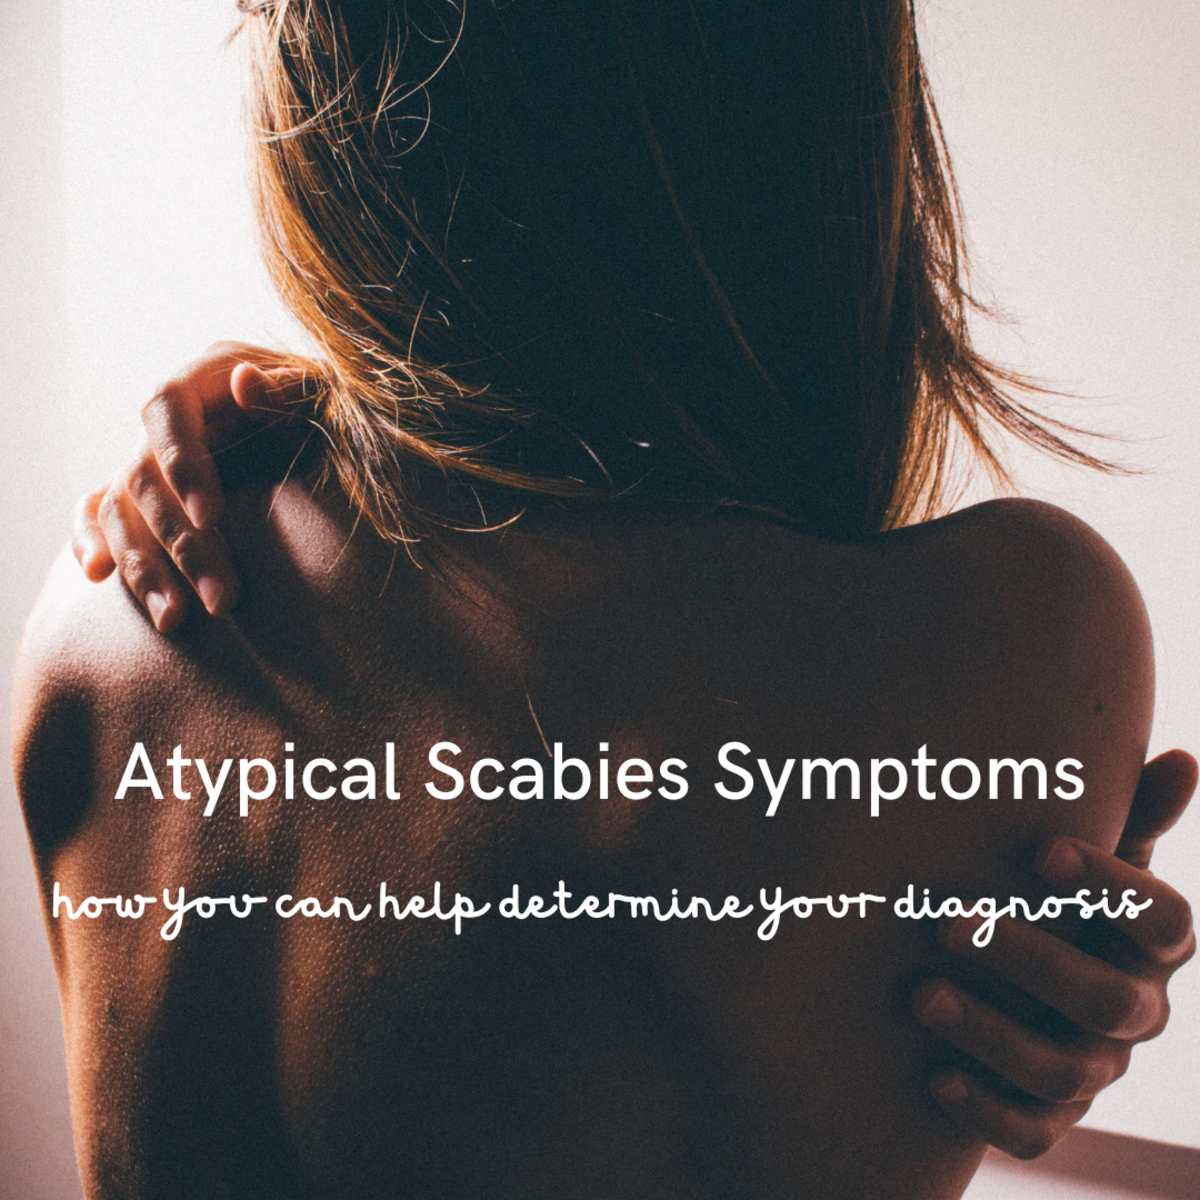 Are your scabies symptoms abnormal? Hopefully my story can help.